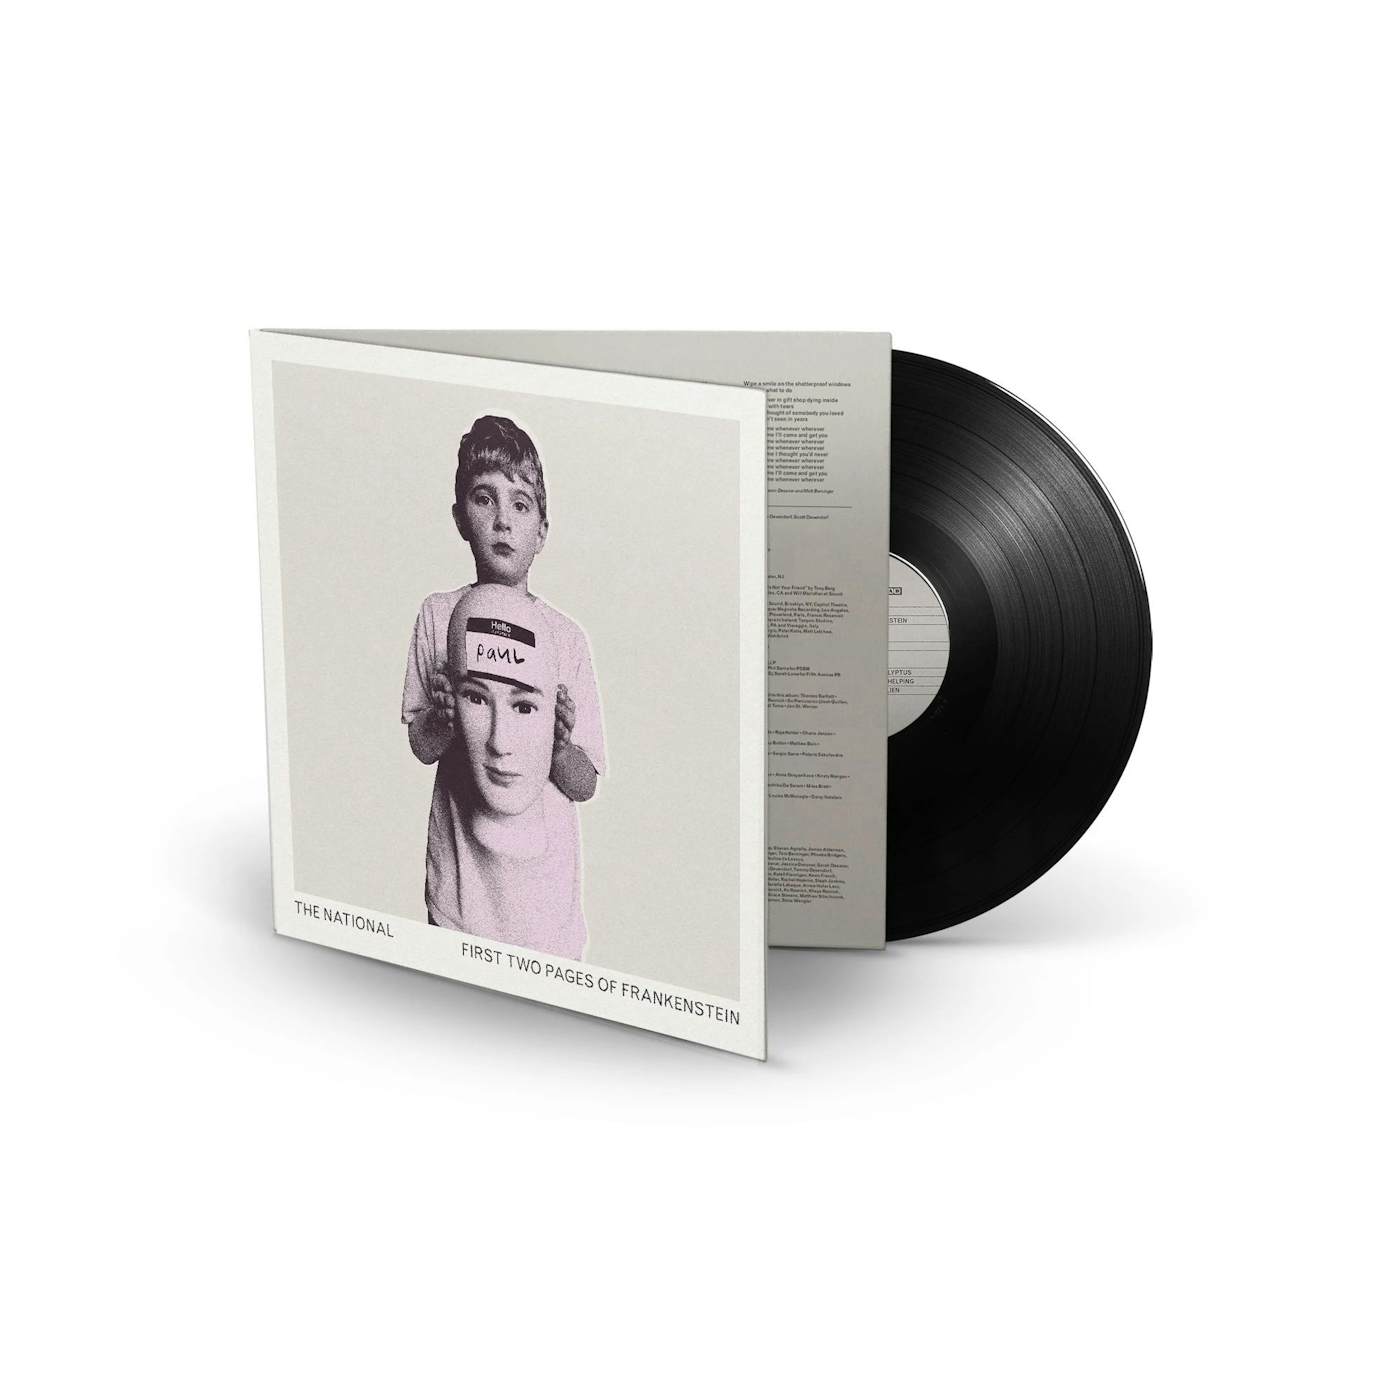 The National - First Two Pages of Frankenstein (Vinyl)